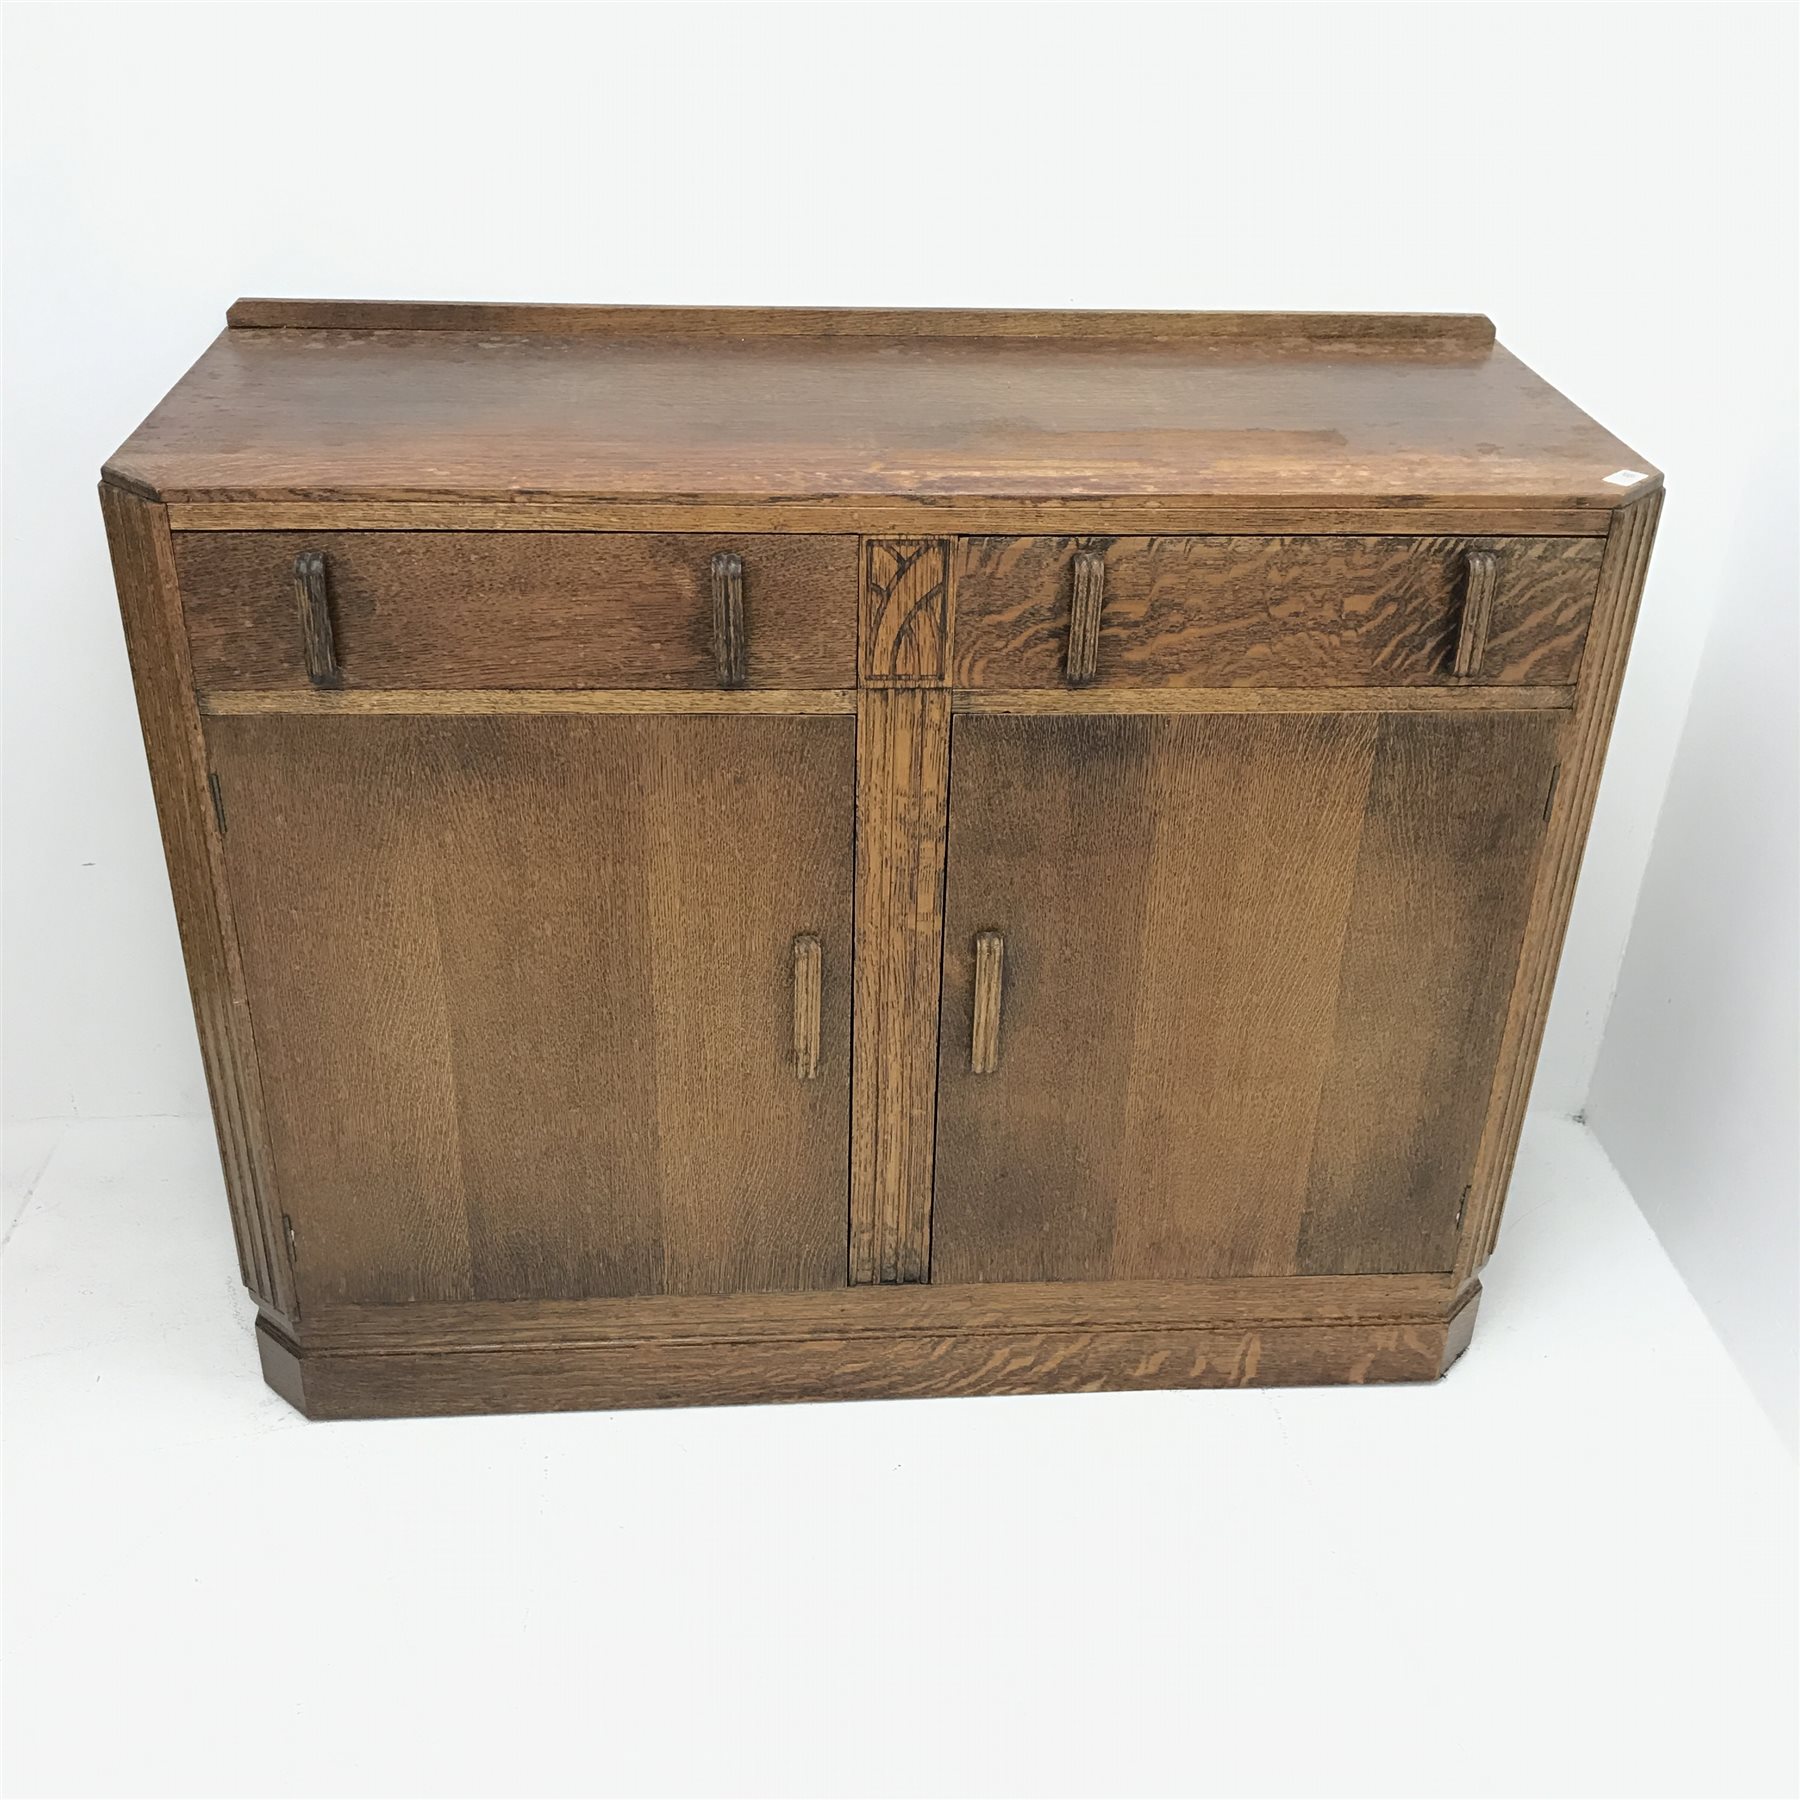 Early 20th century oak sideboard fitted with two drawers and two cupboards, W122cm, H96cm, D47cm - Image 2 of 5